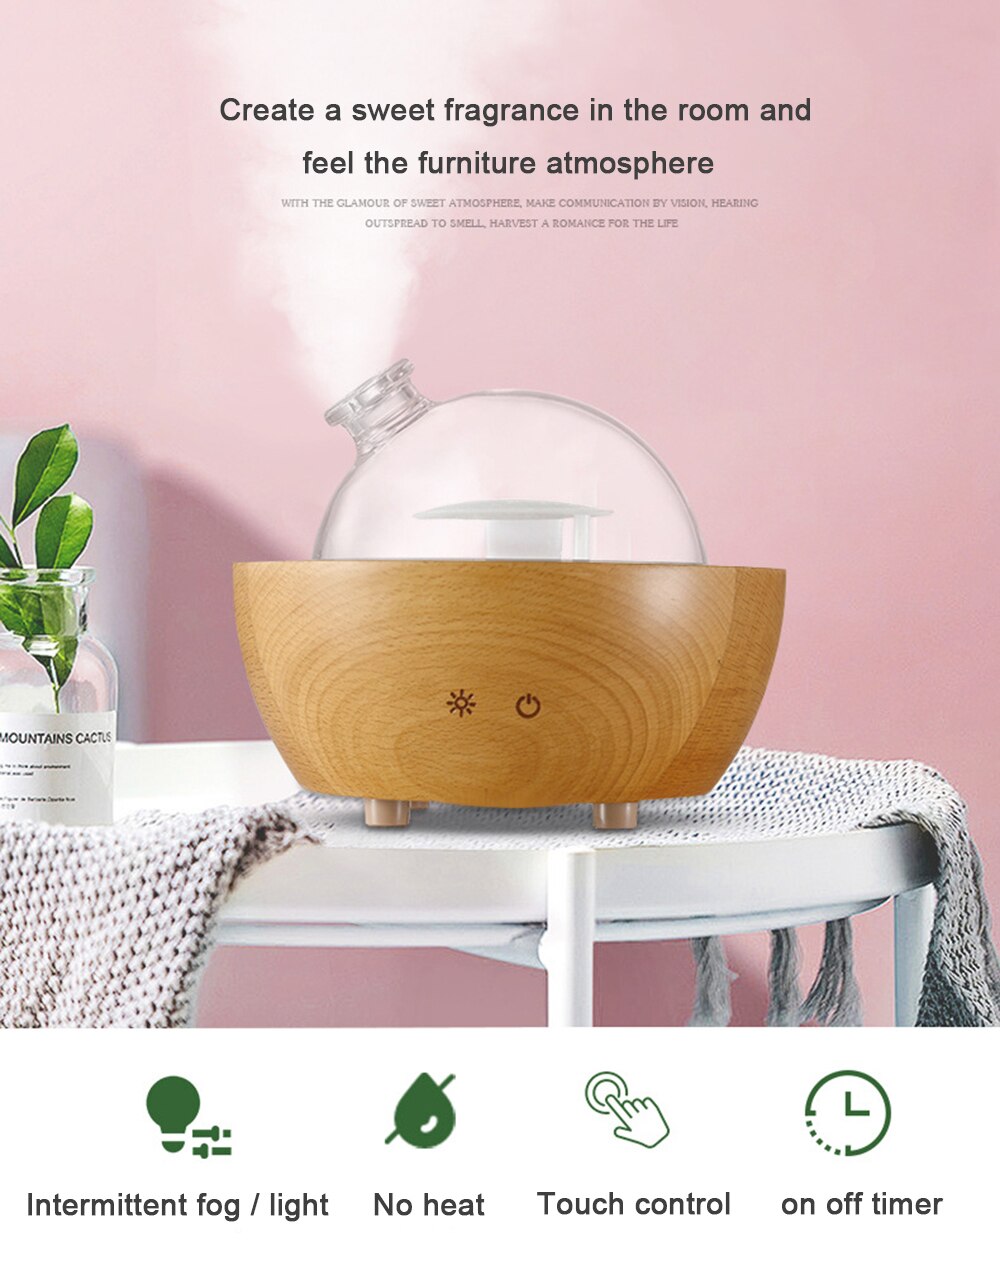 Large Capacity 150ML Bluetooth Wood Humidifier Diffuser Spray Aroma for Household